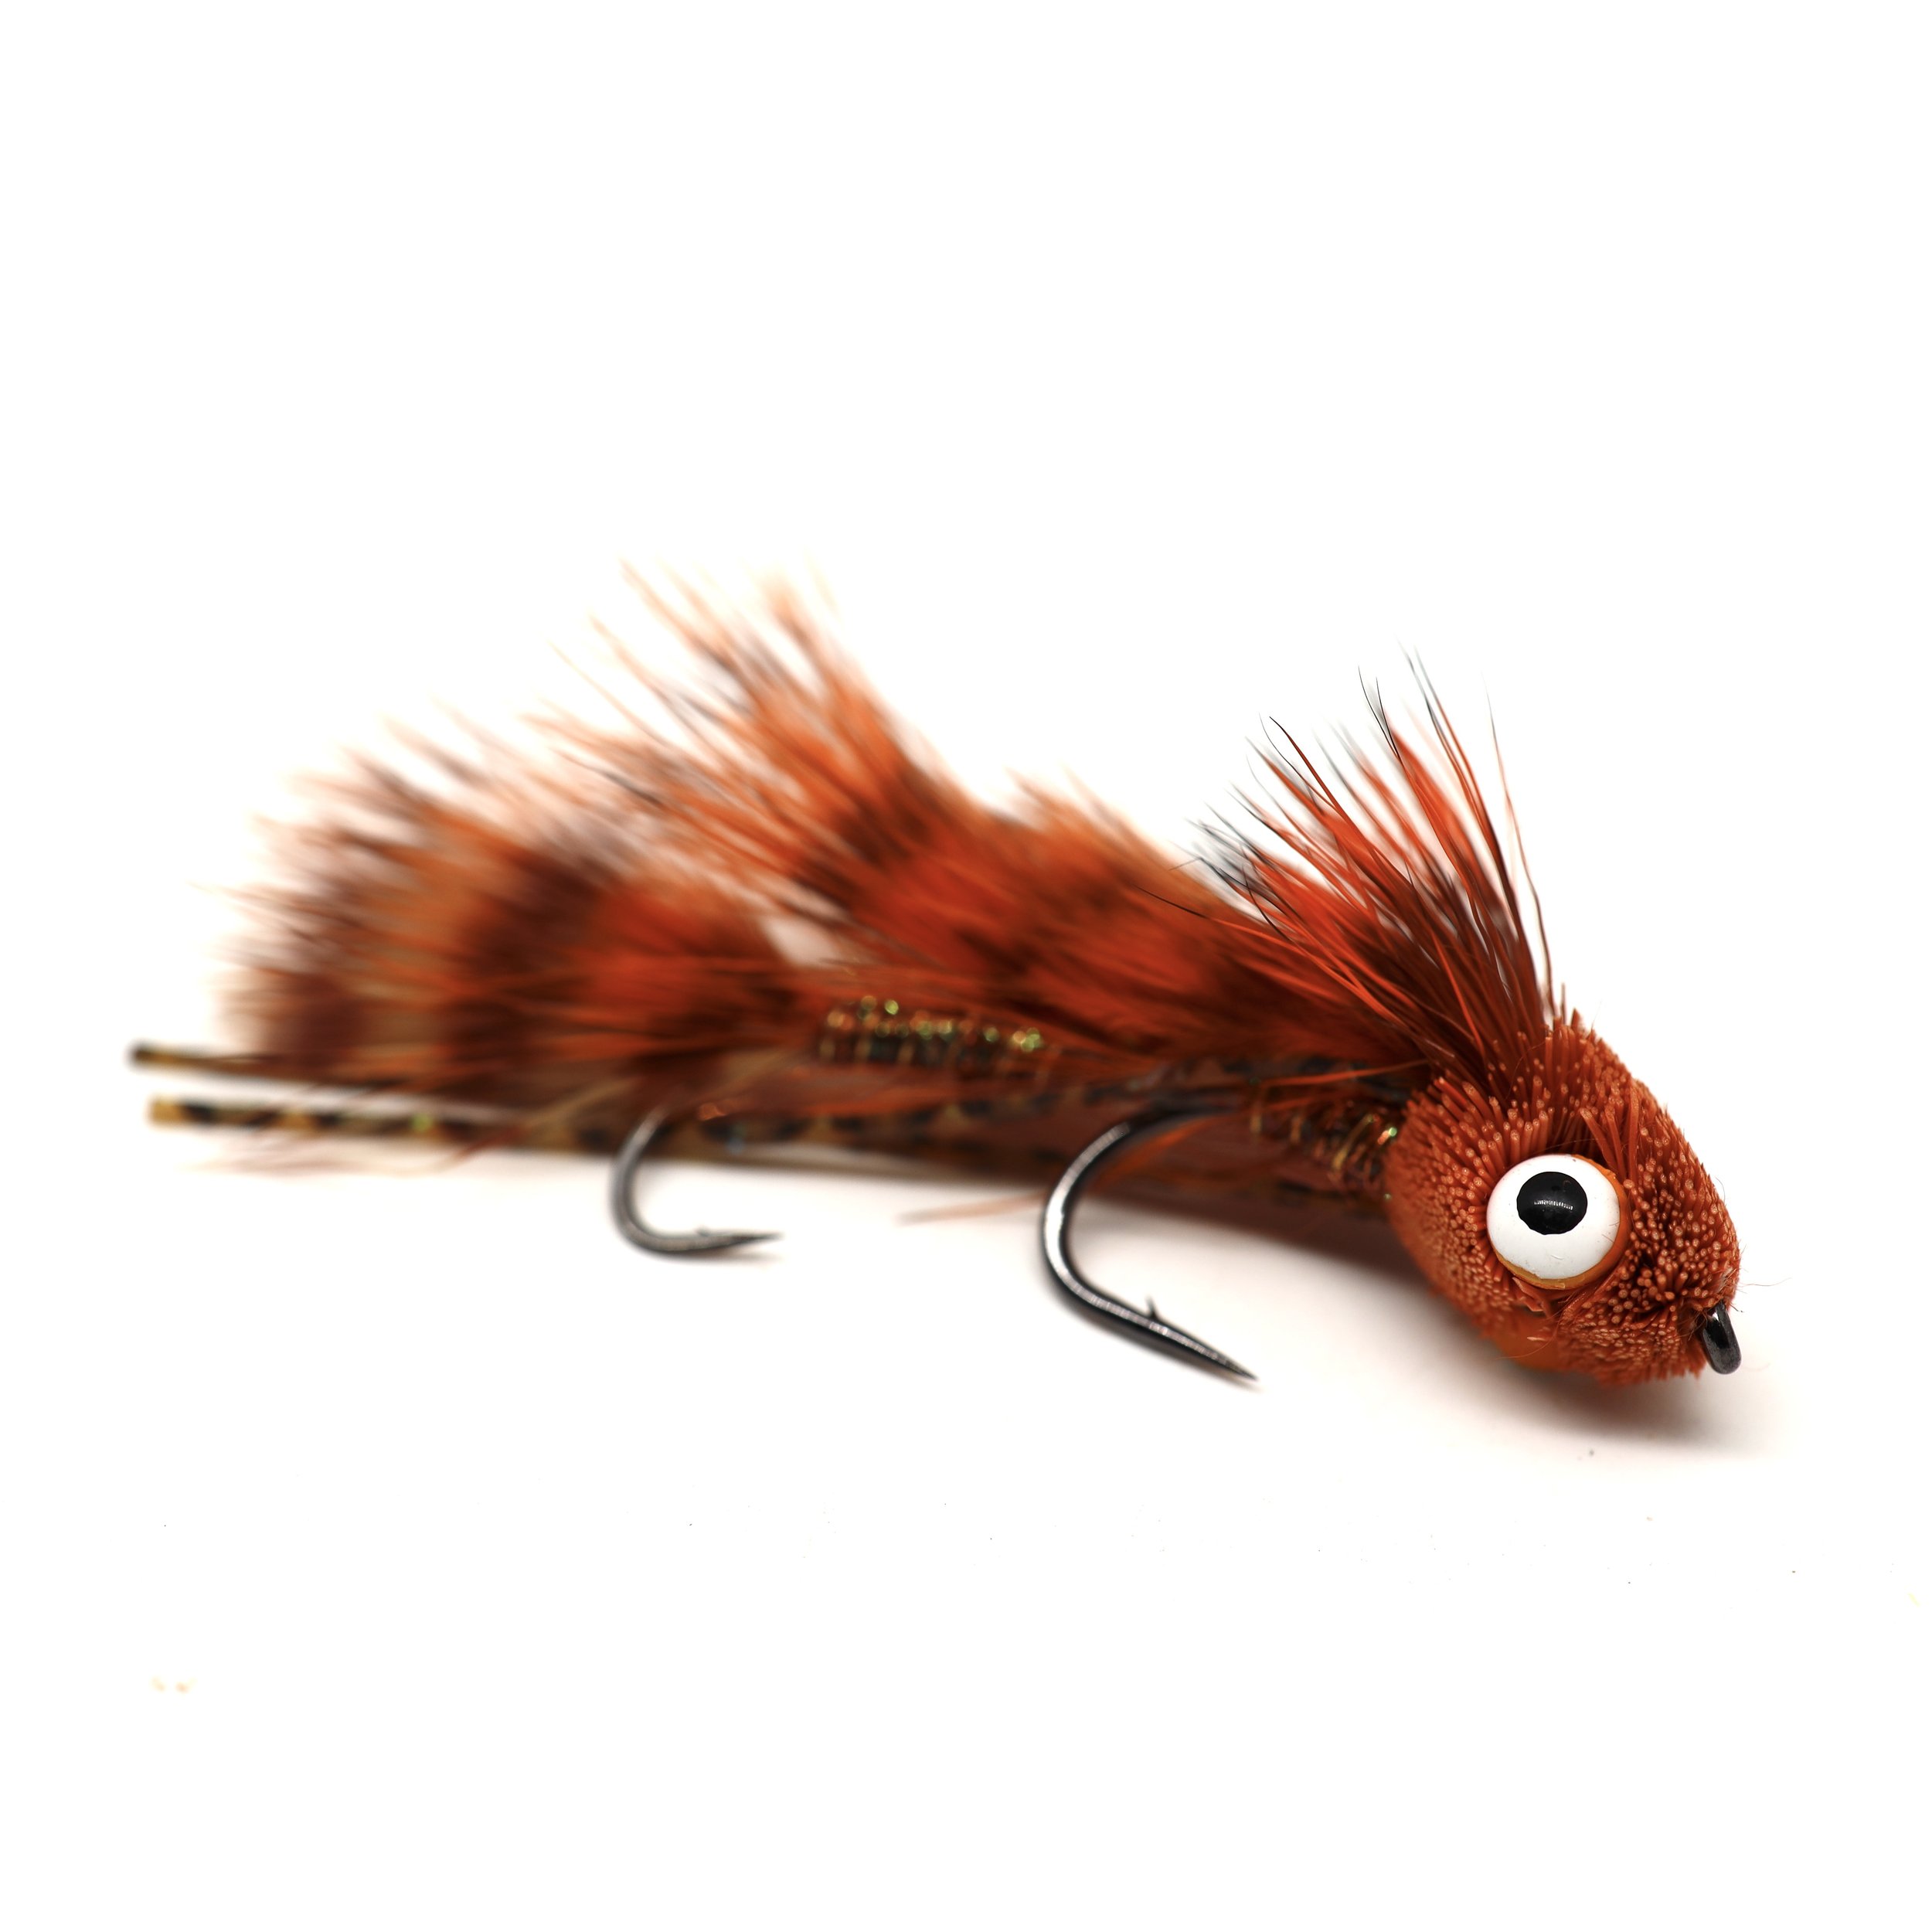 Fly Tying: Kelly Galloup's Articulated Boogie Man (+playlist